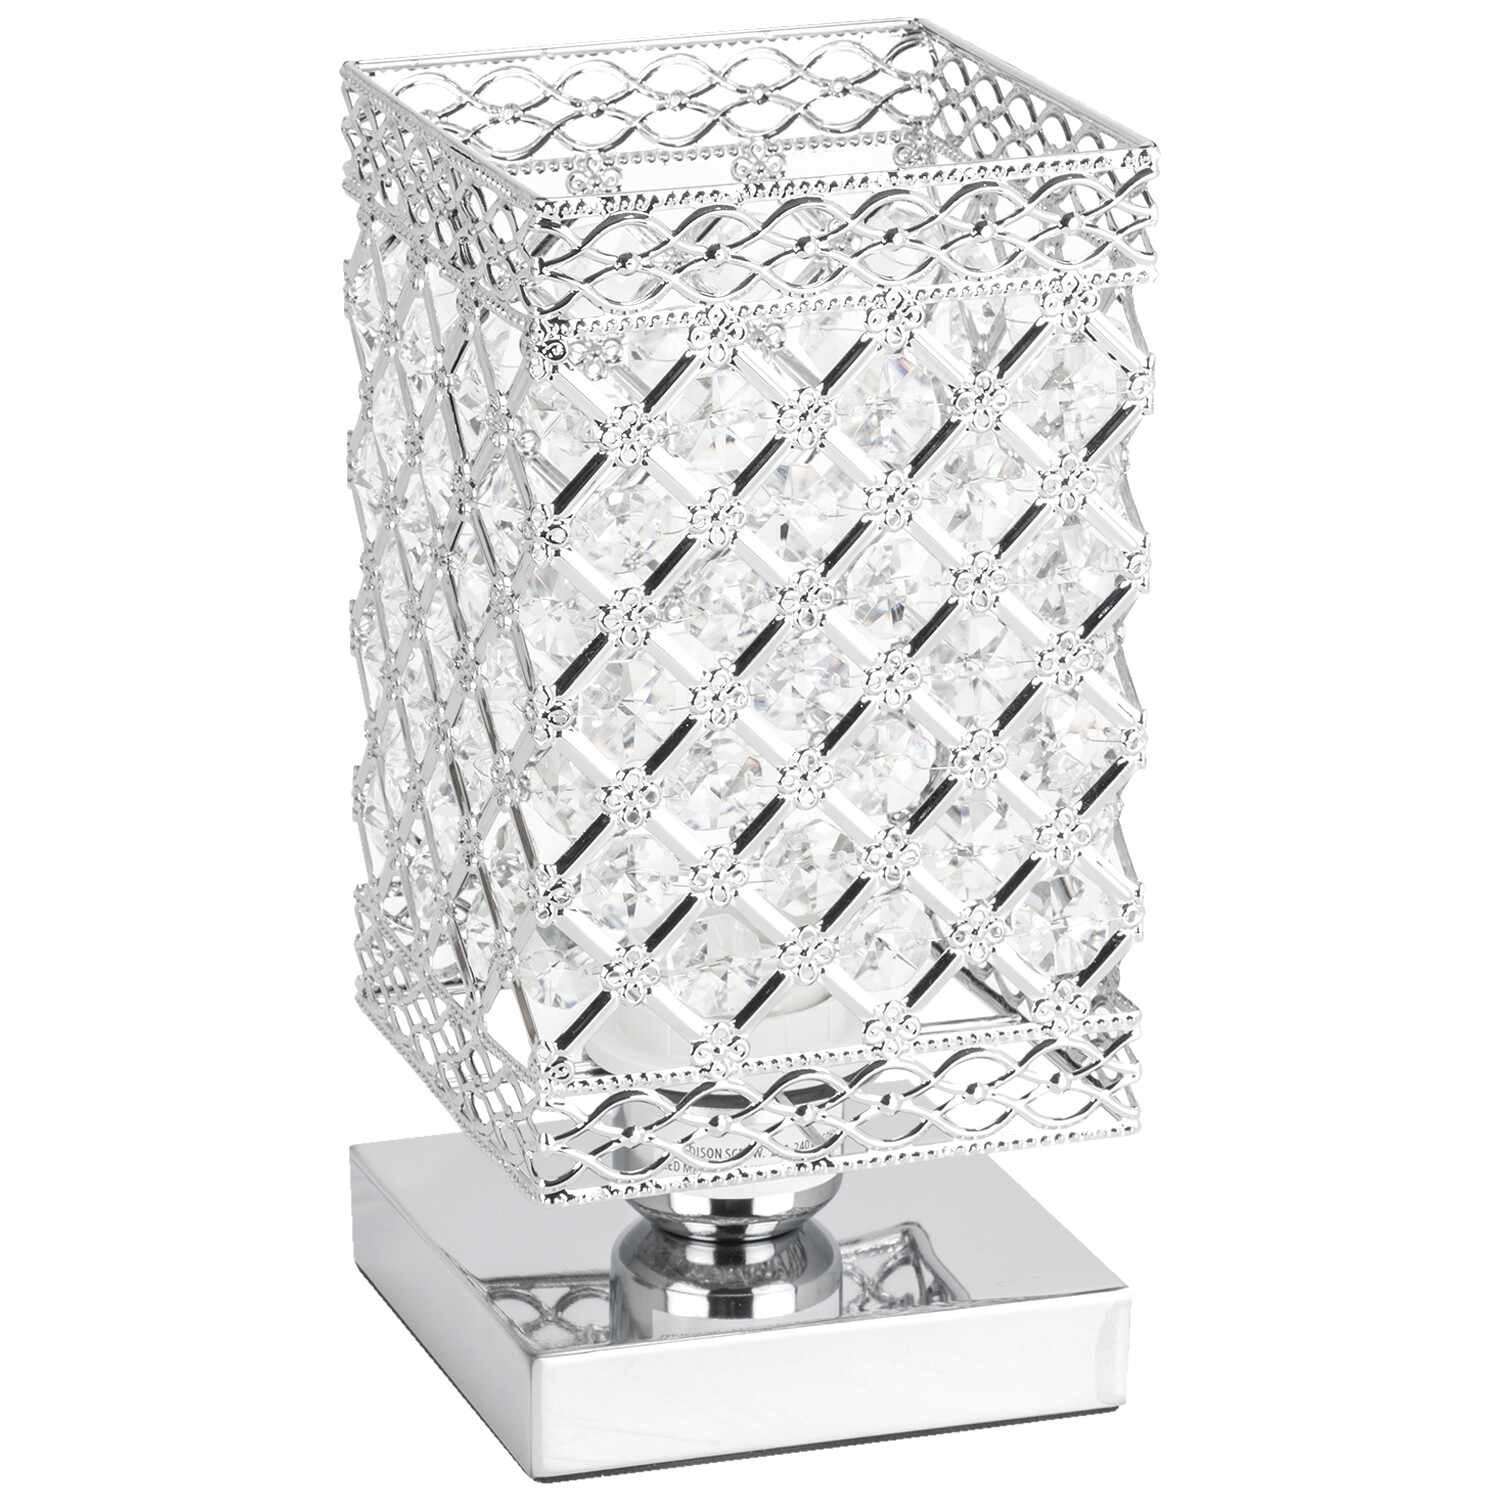 Silver Chrome Square Jewelled Table Lamp Image 1